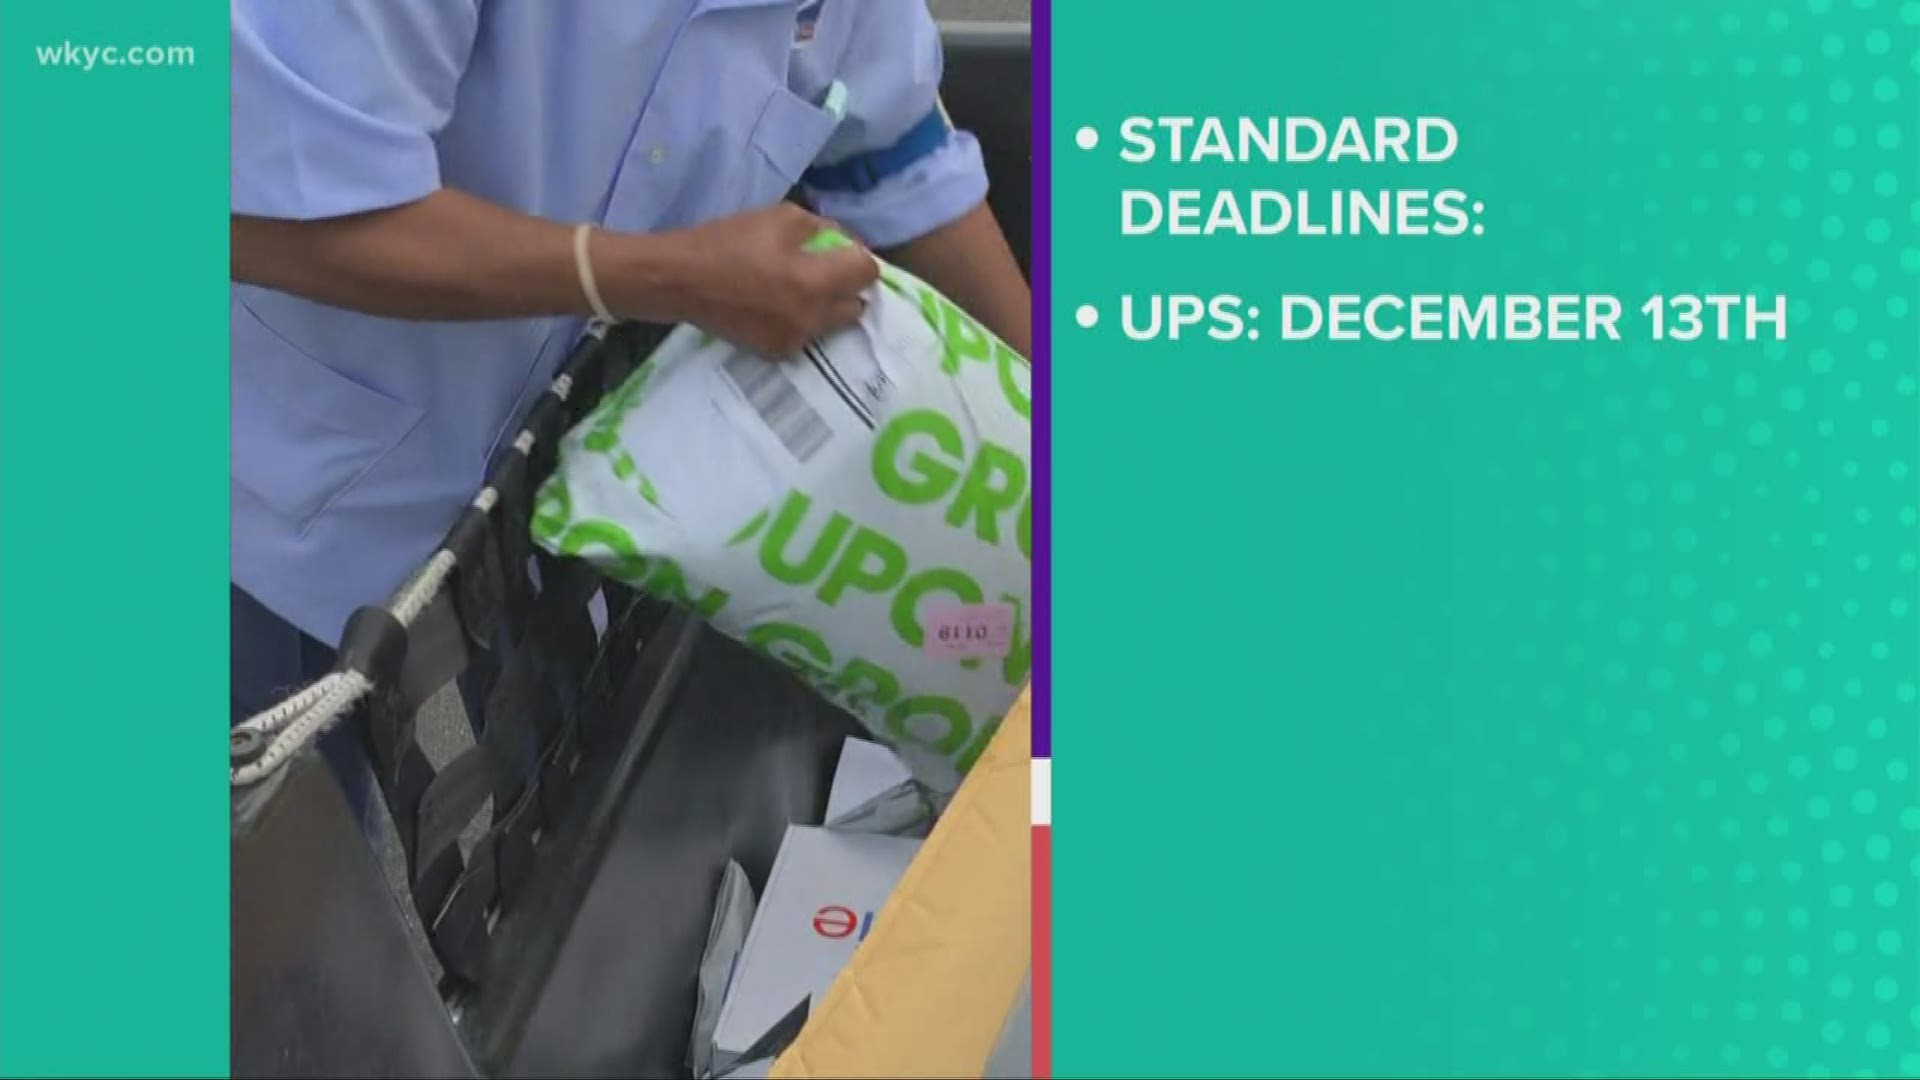 Make sure all of your holiday packages arrive on time. Take note of these shipping deadlines!